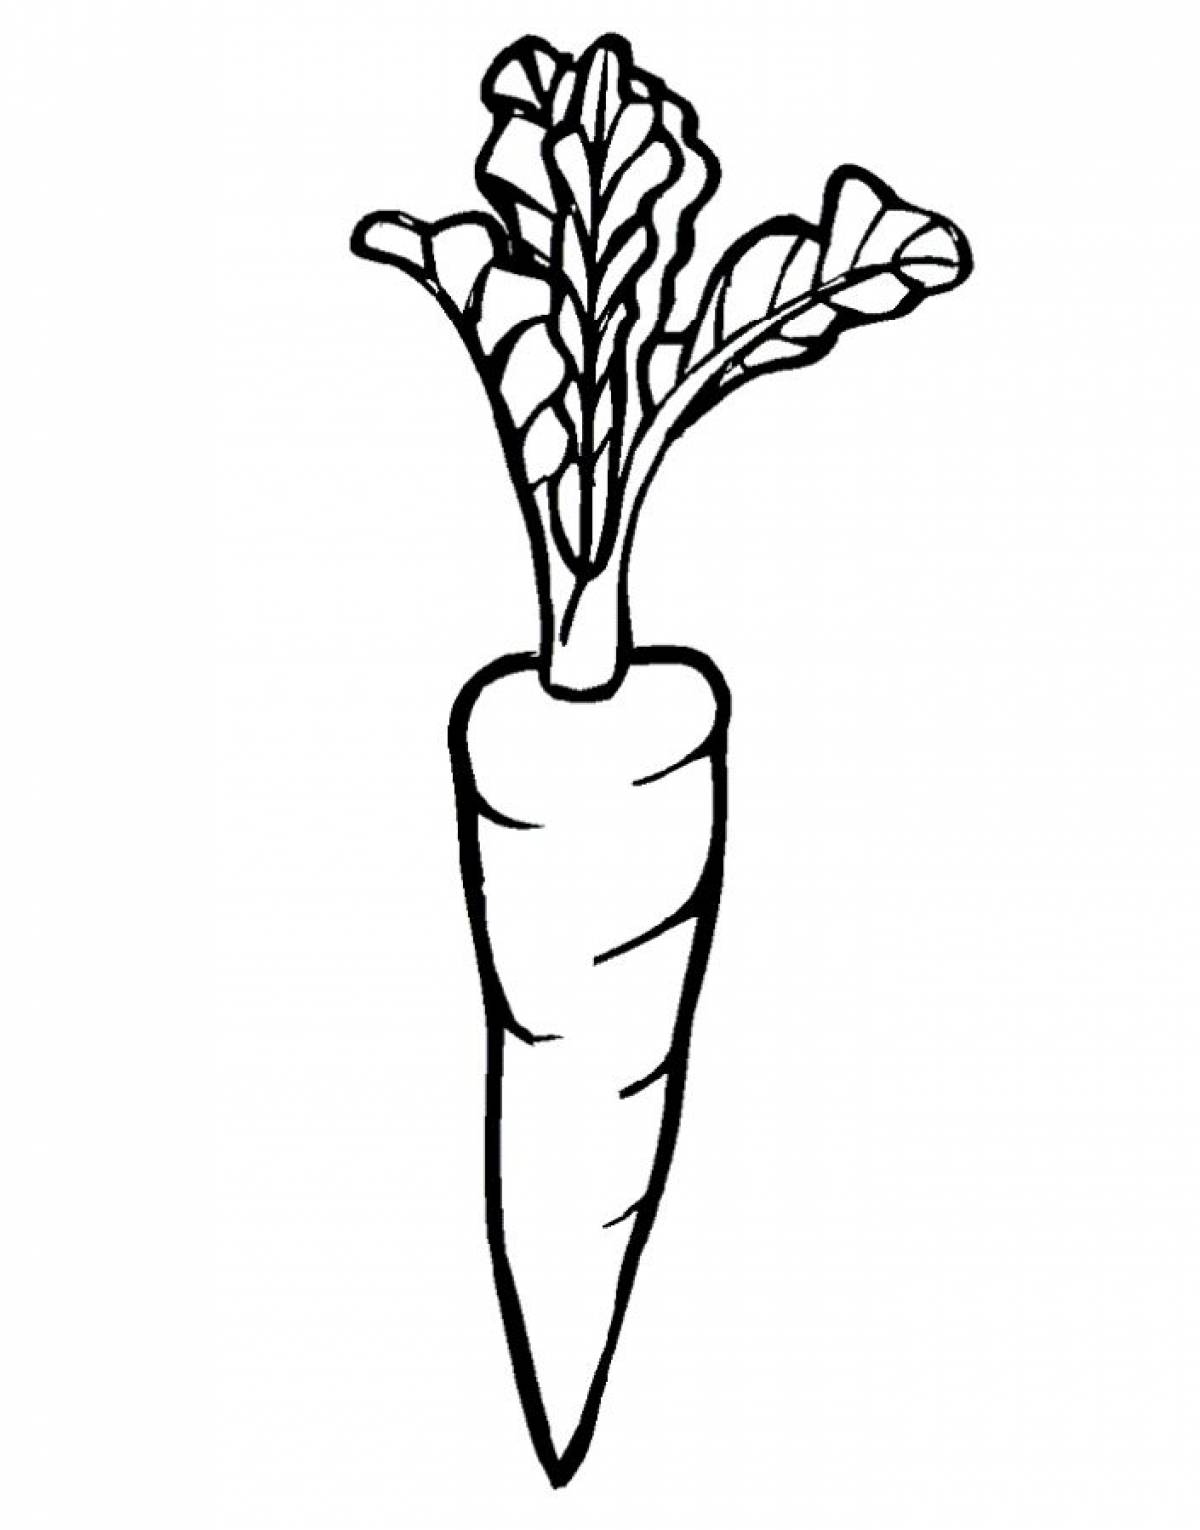 Carrot with green tail